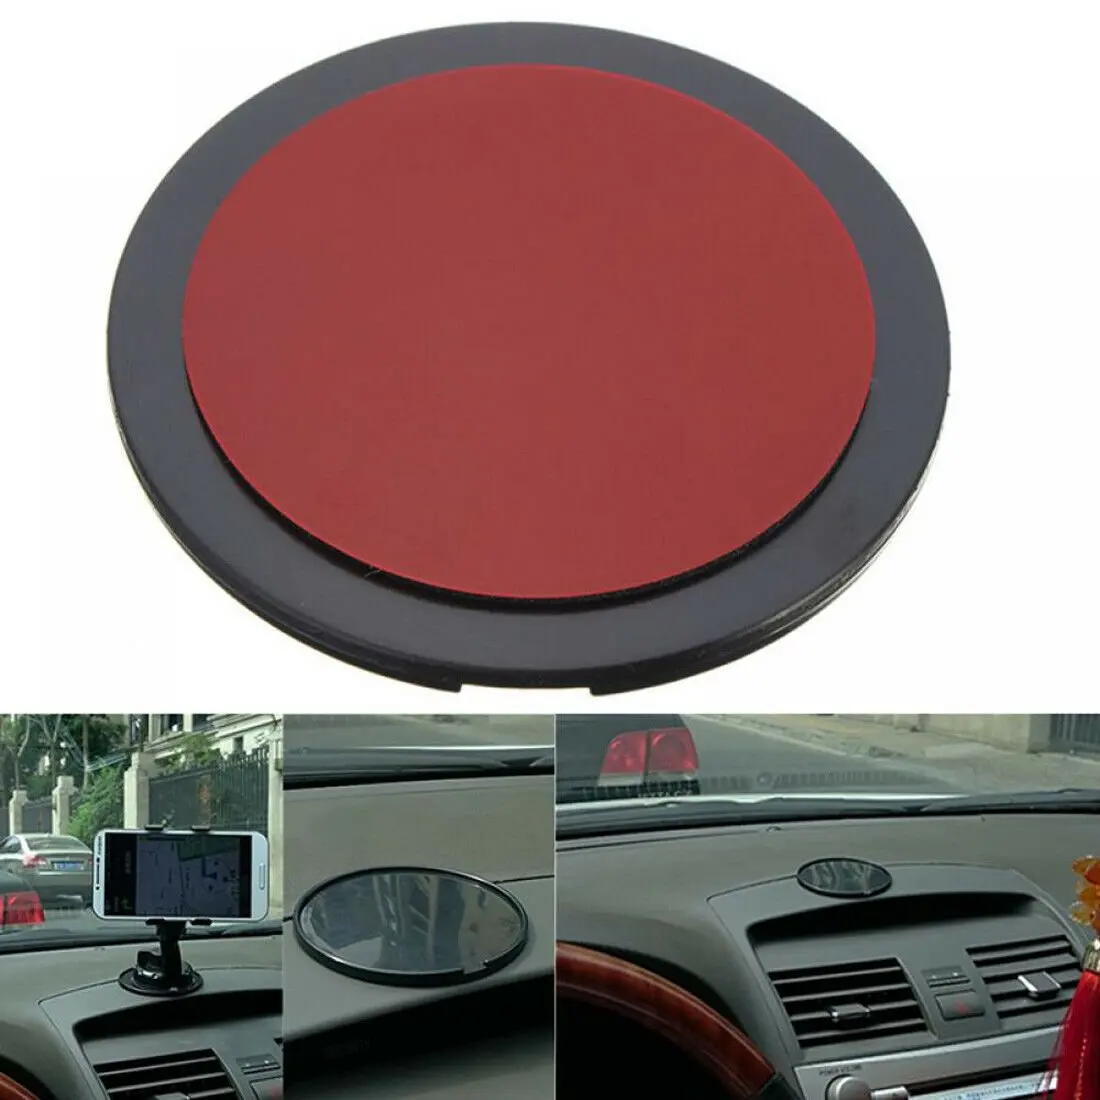 

Adhesive Sticky Pad Mounting Disk for Car Dashboard, Suction Cup Pad for Cell Phone Holder Car Mount with 80mm Diameter